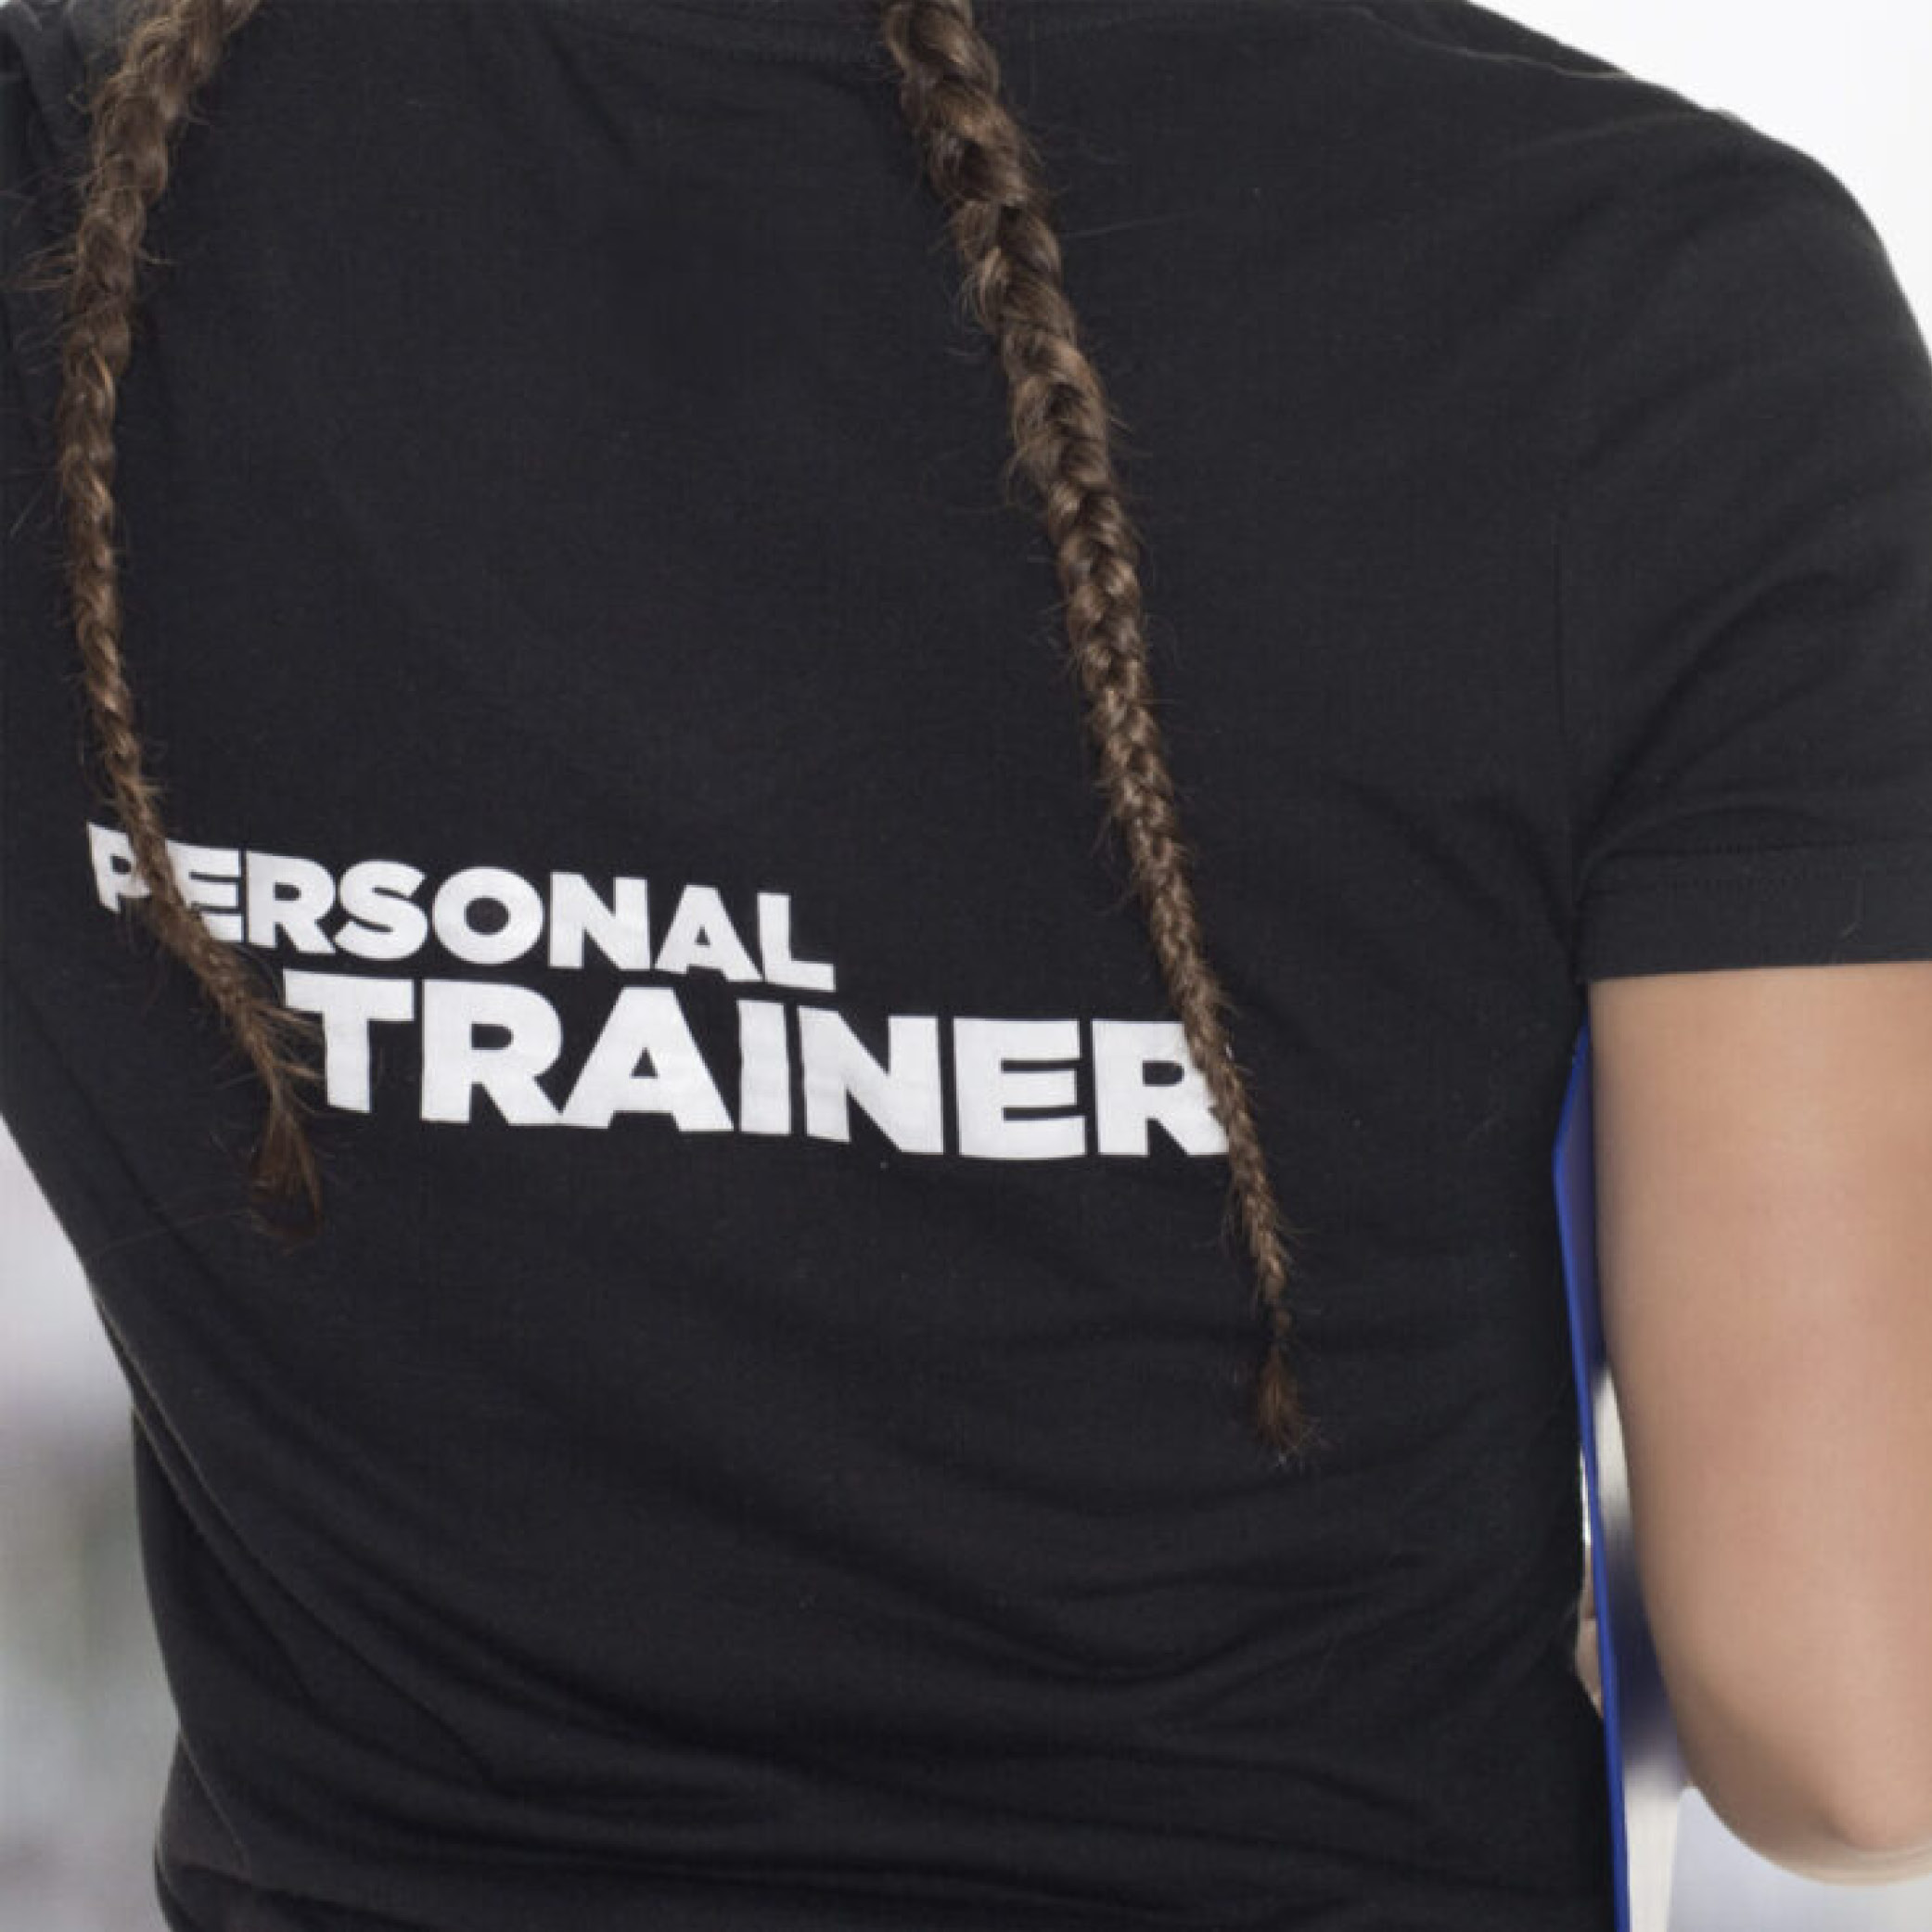   PERSONAL TRAINER